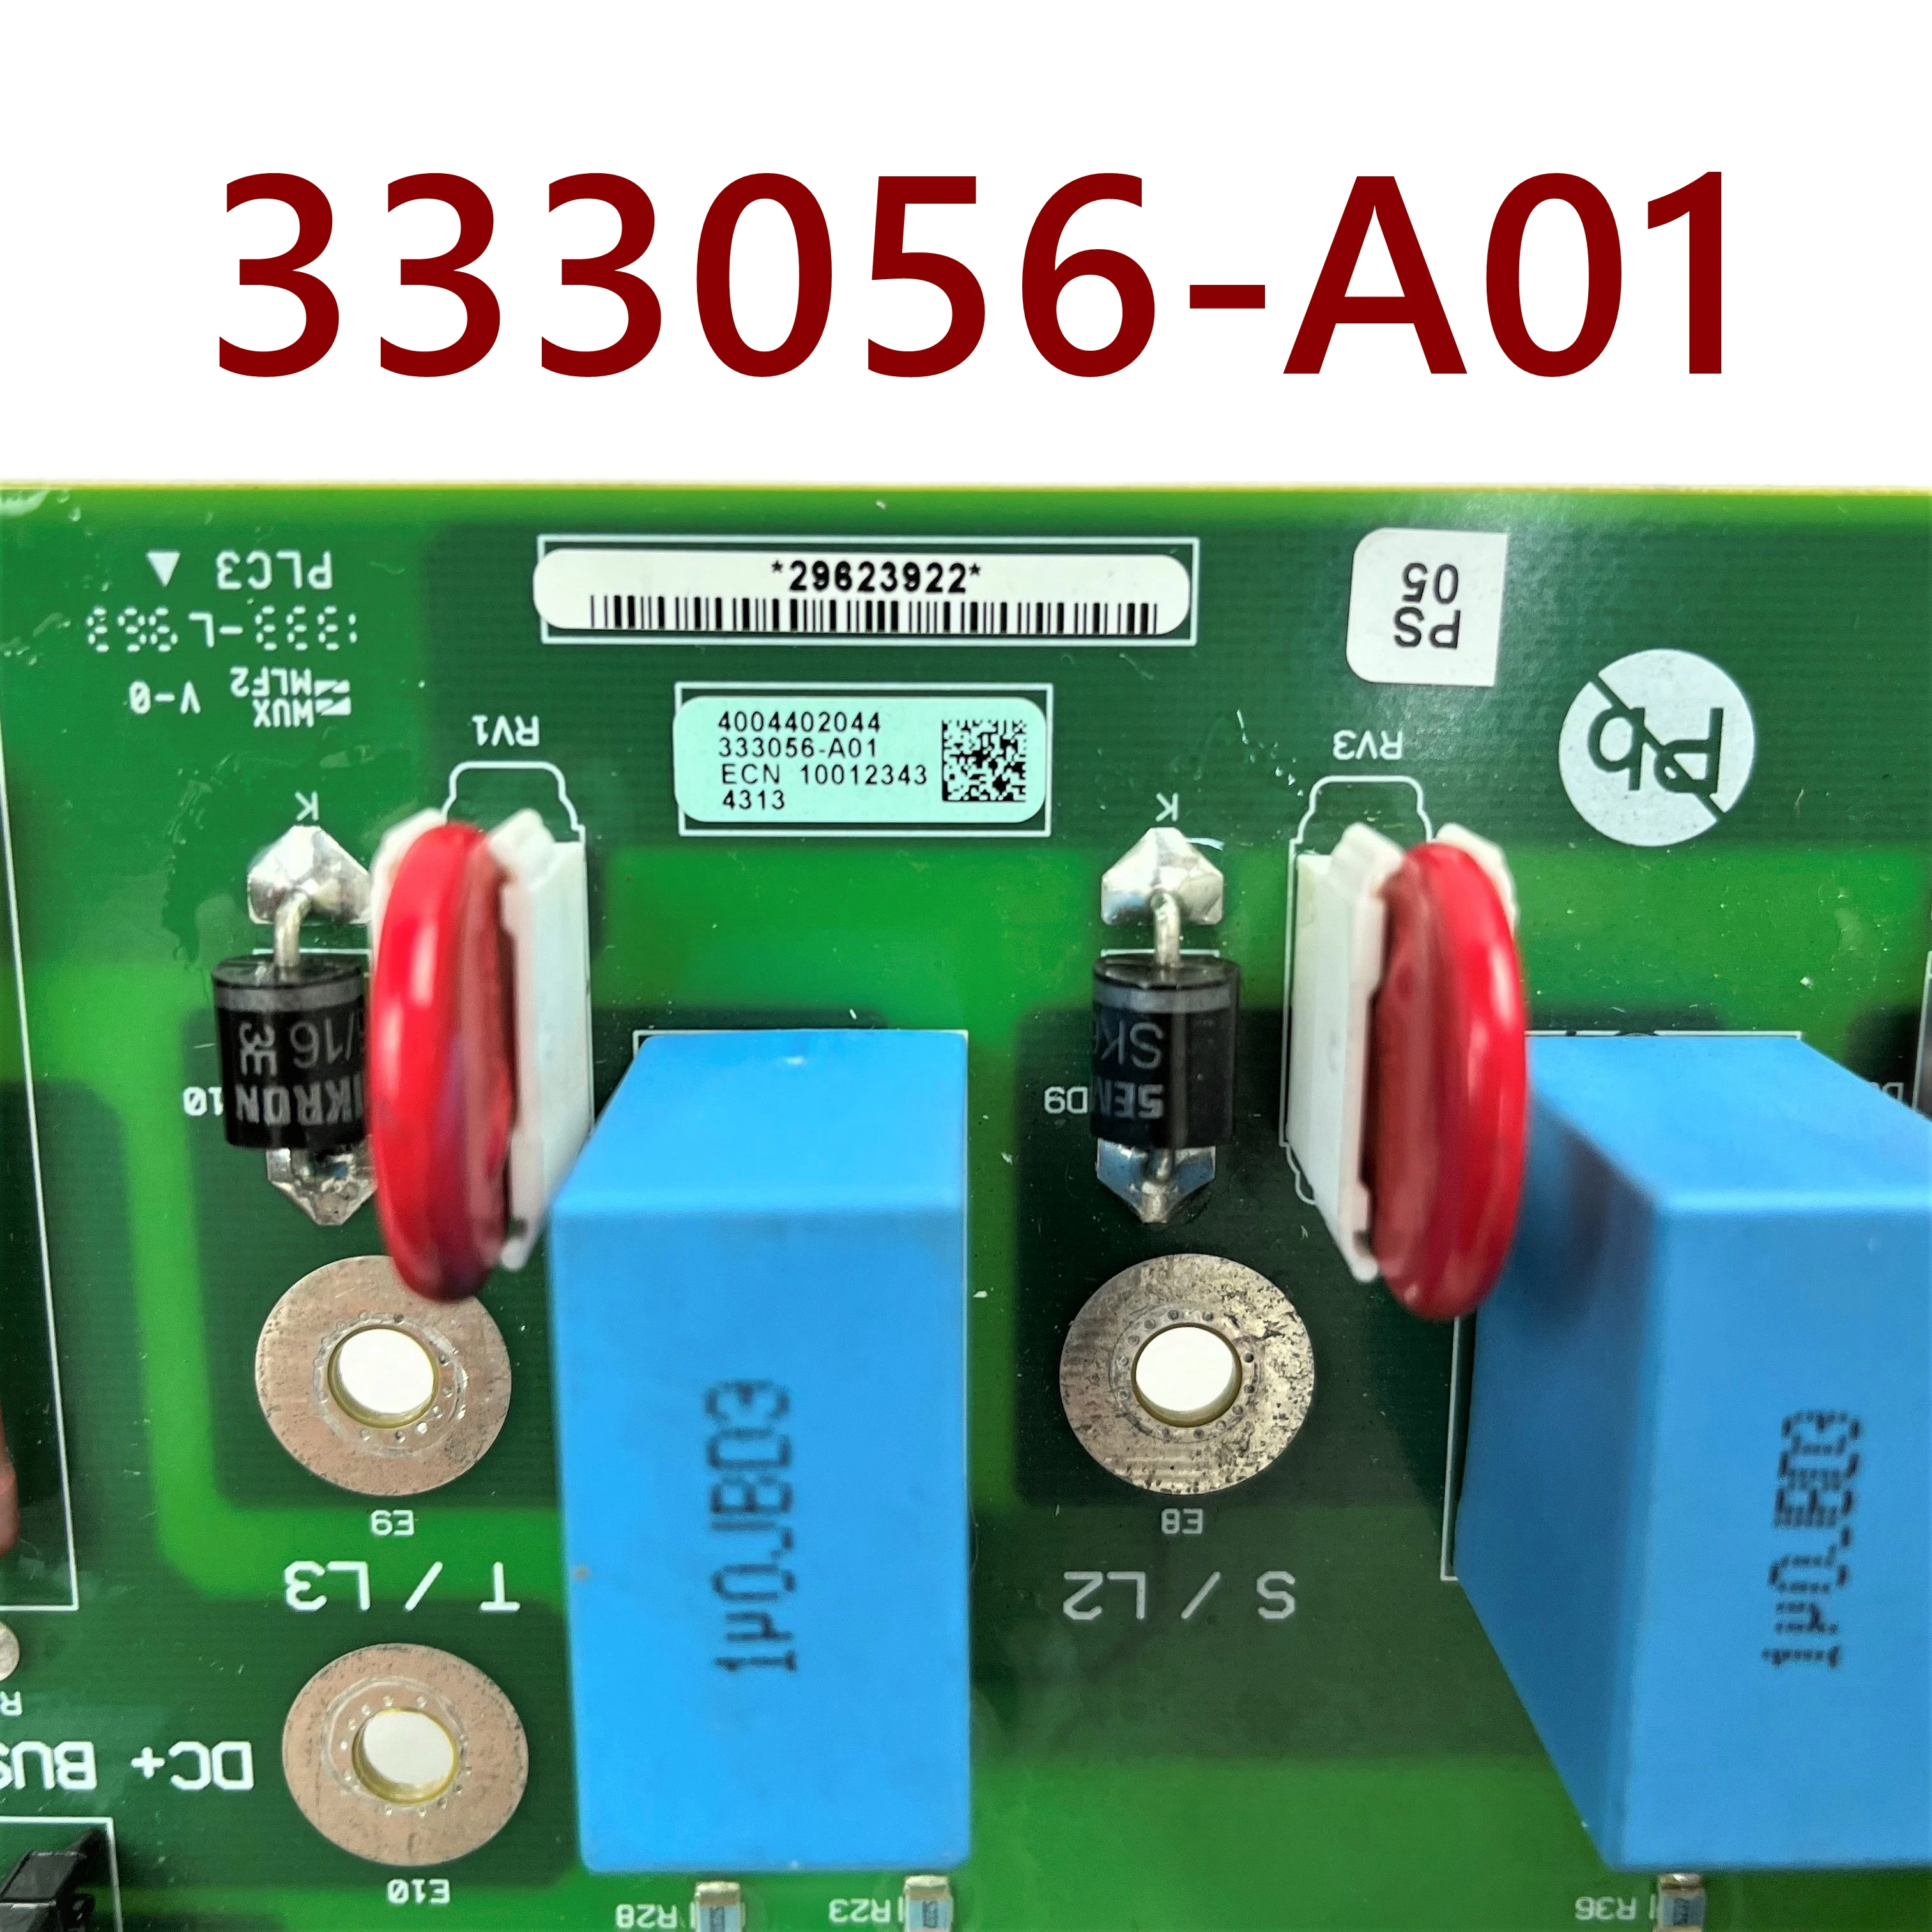 

Used 333056-A01（delivery fast）